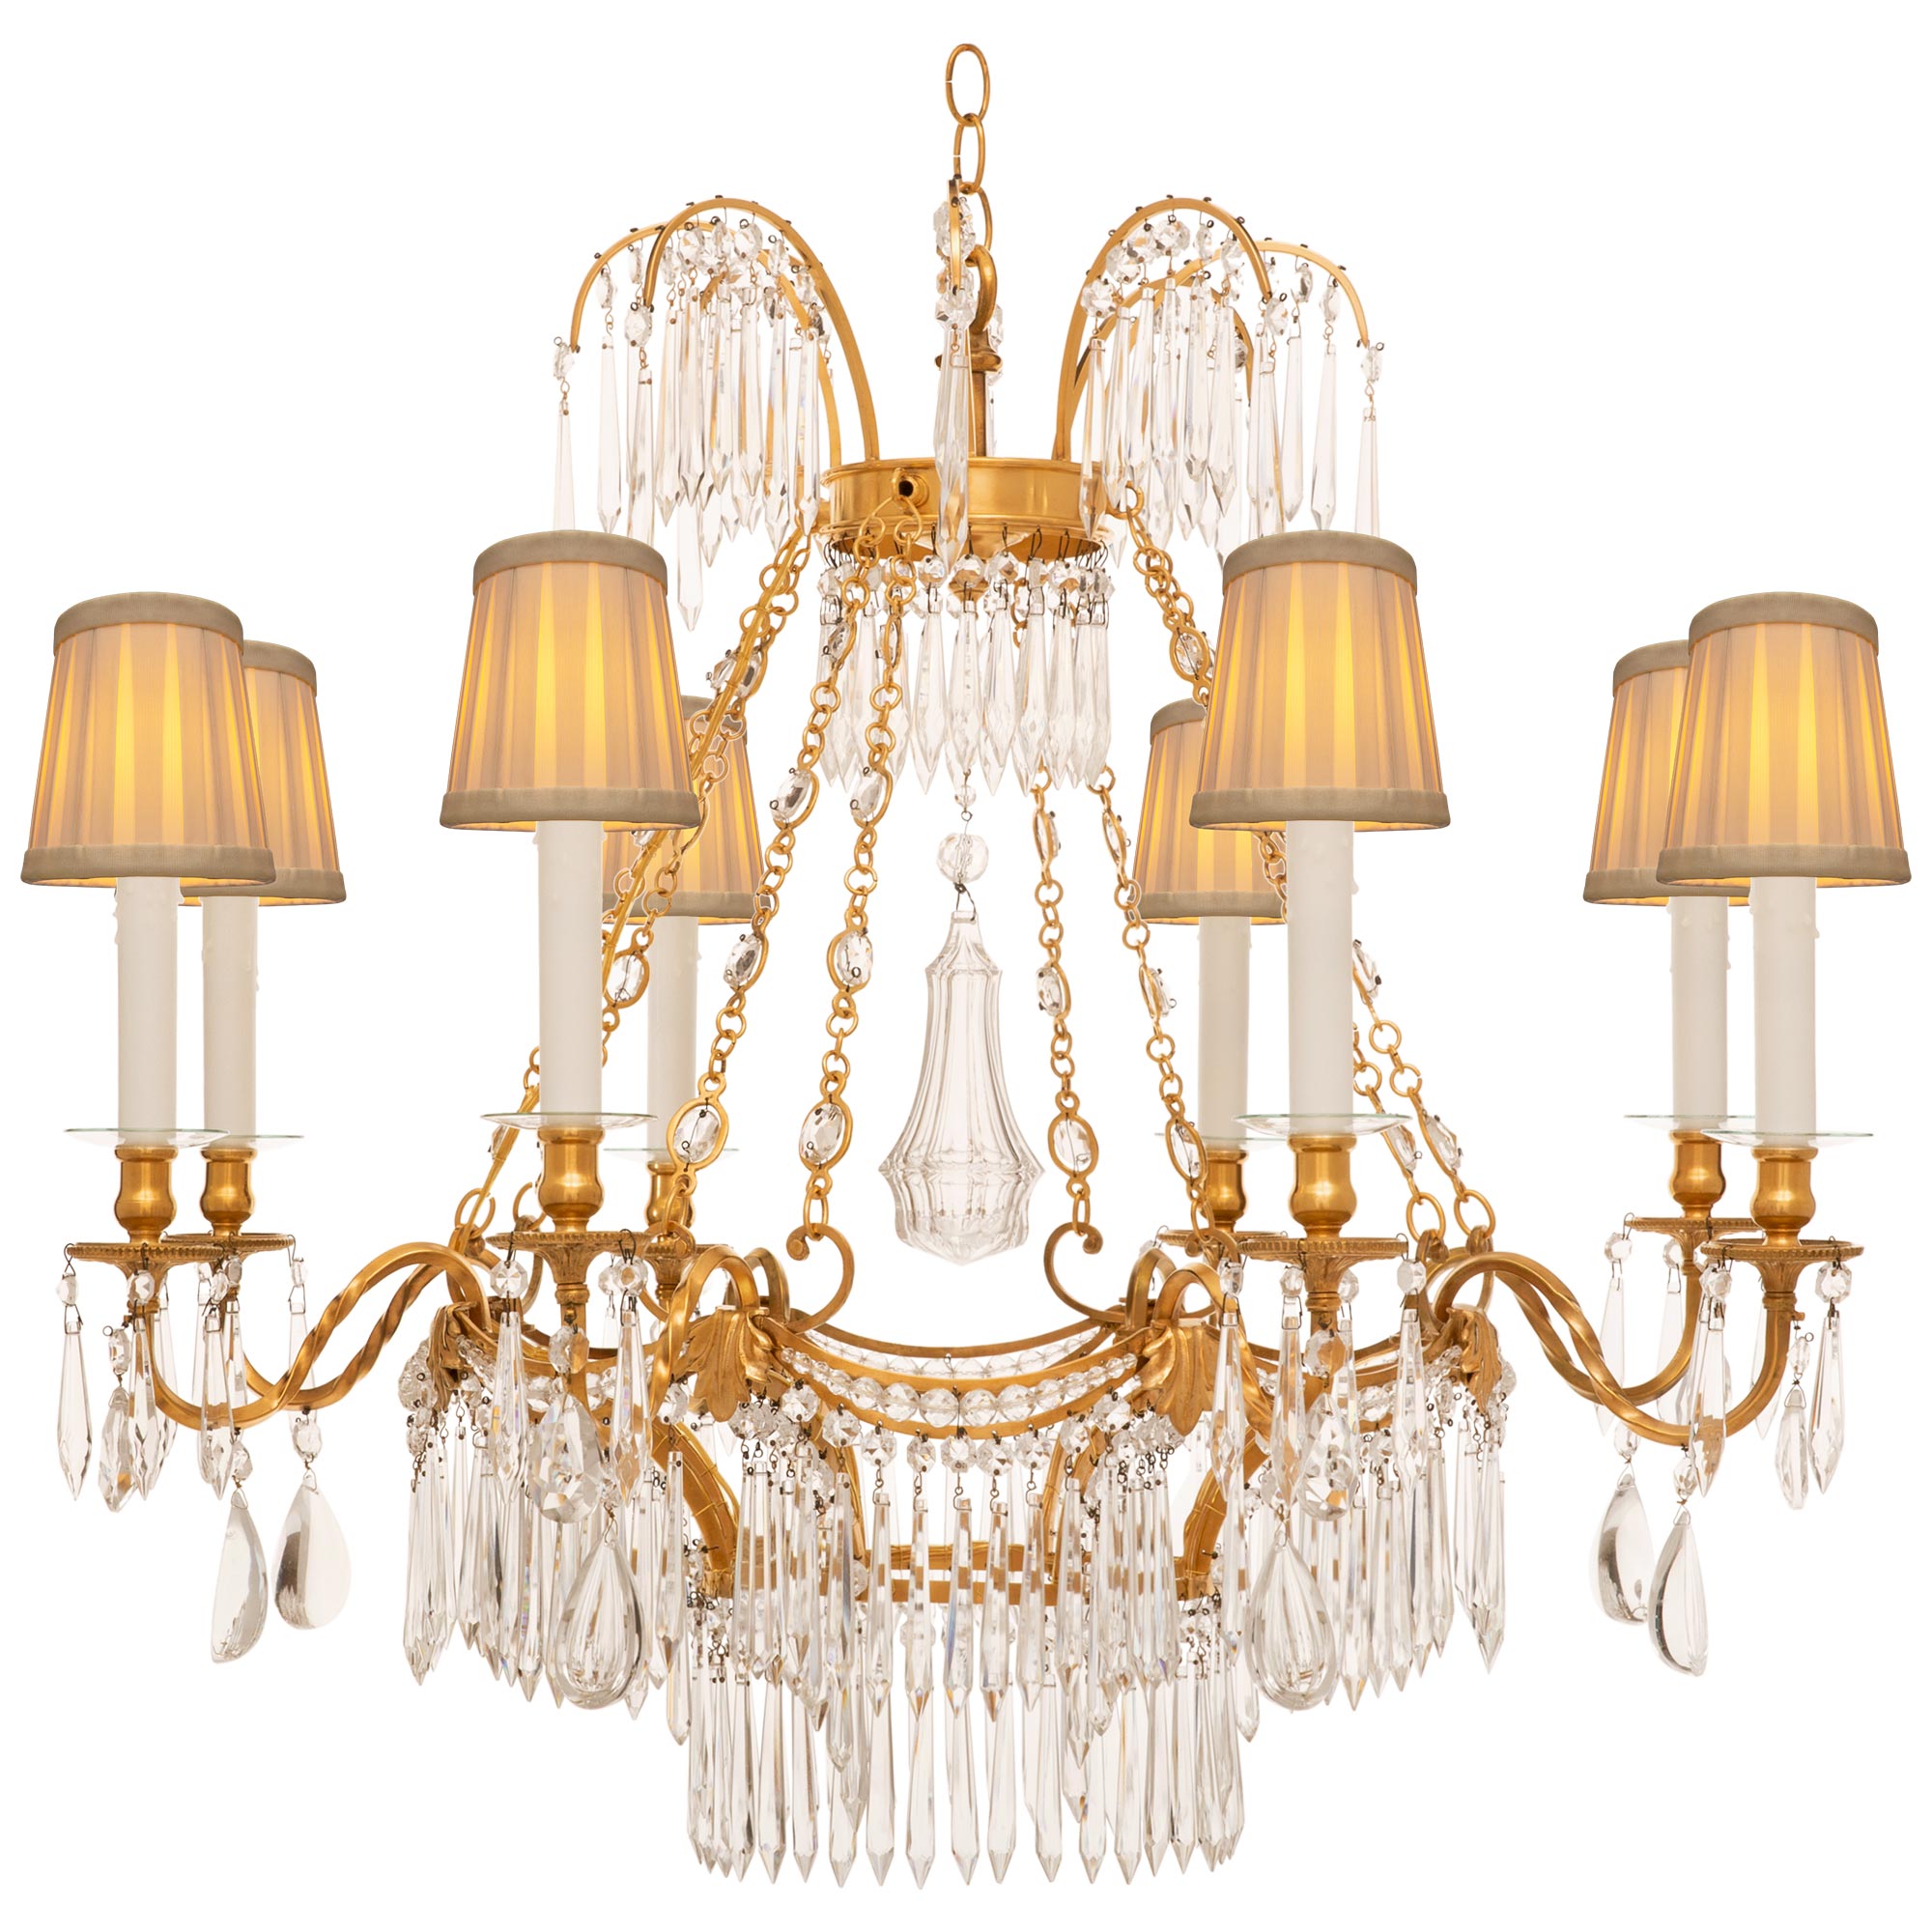 Baltic 19th Century Neo-Classical St. Ormolu and Crystal Chandelier For Sale